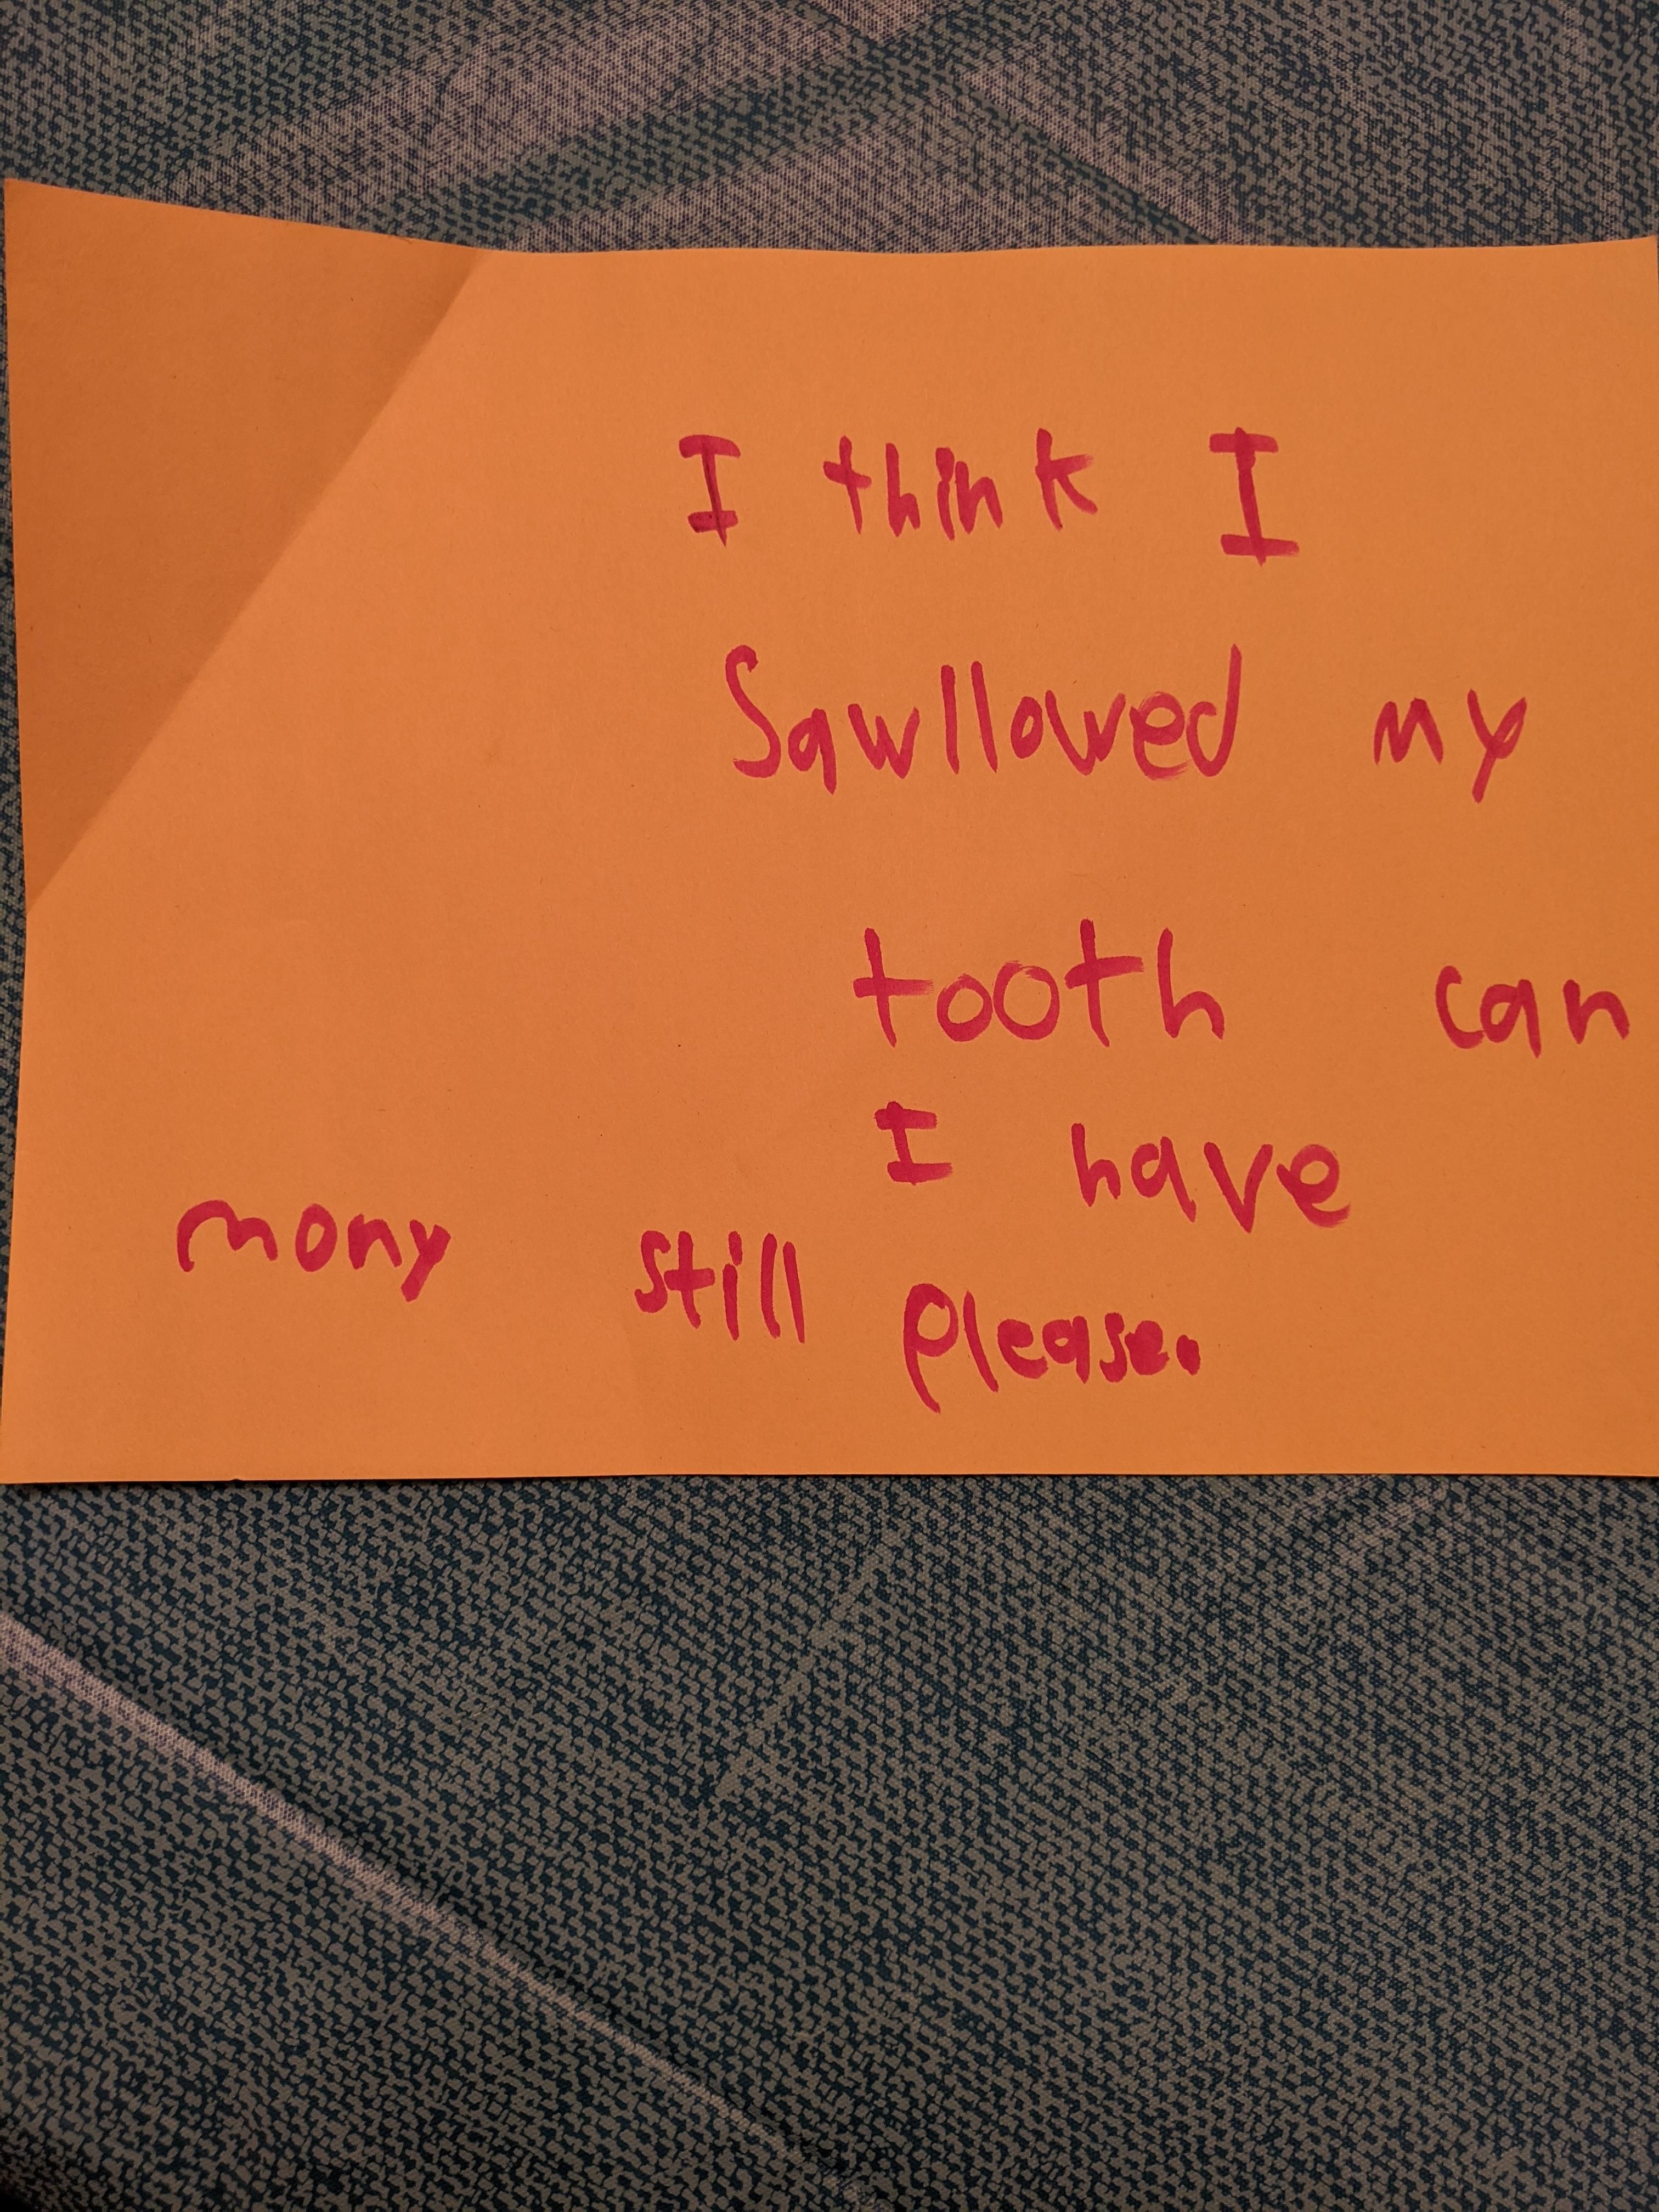 So my 8yo lost a tooth today...